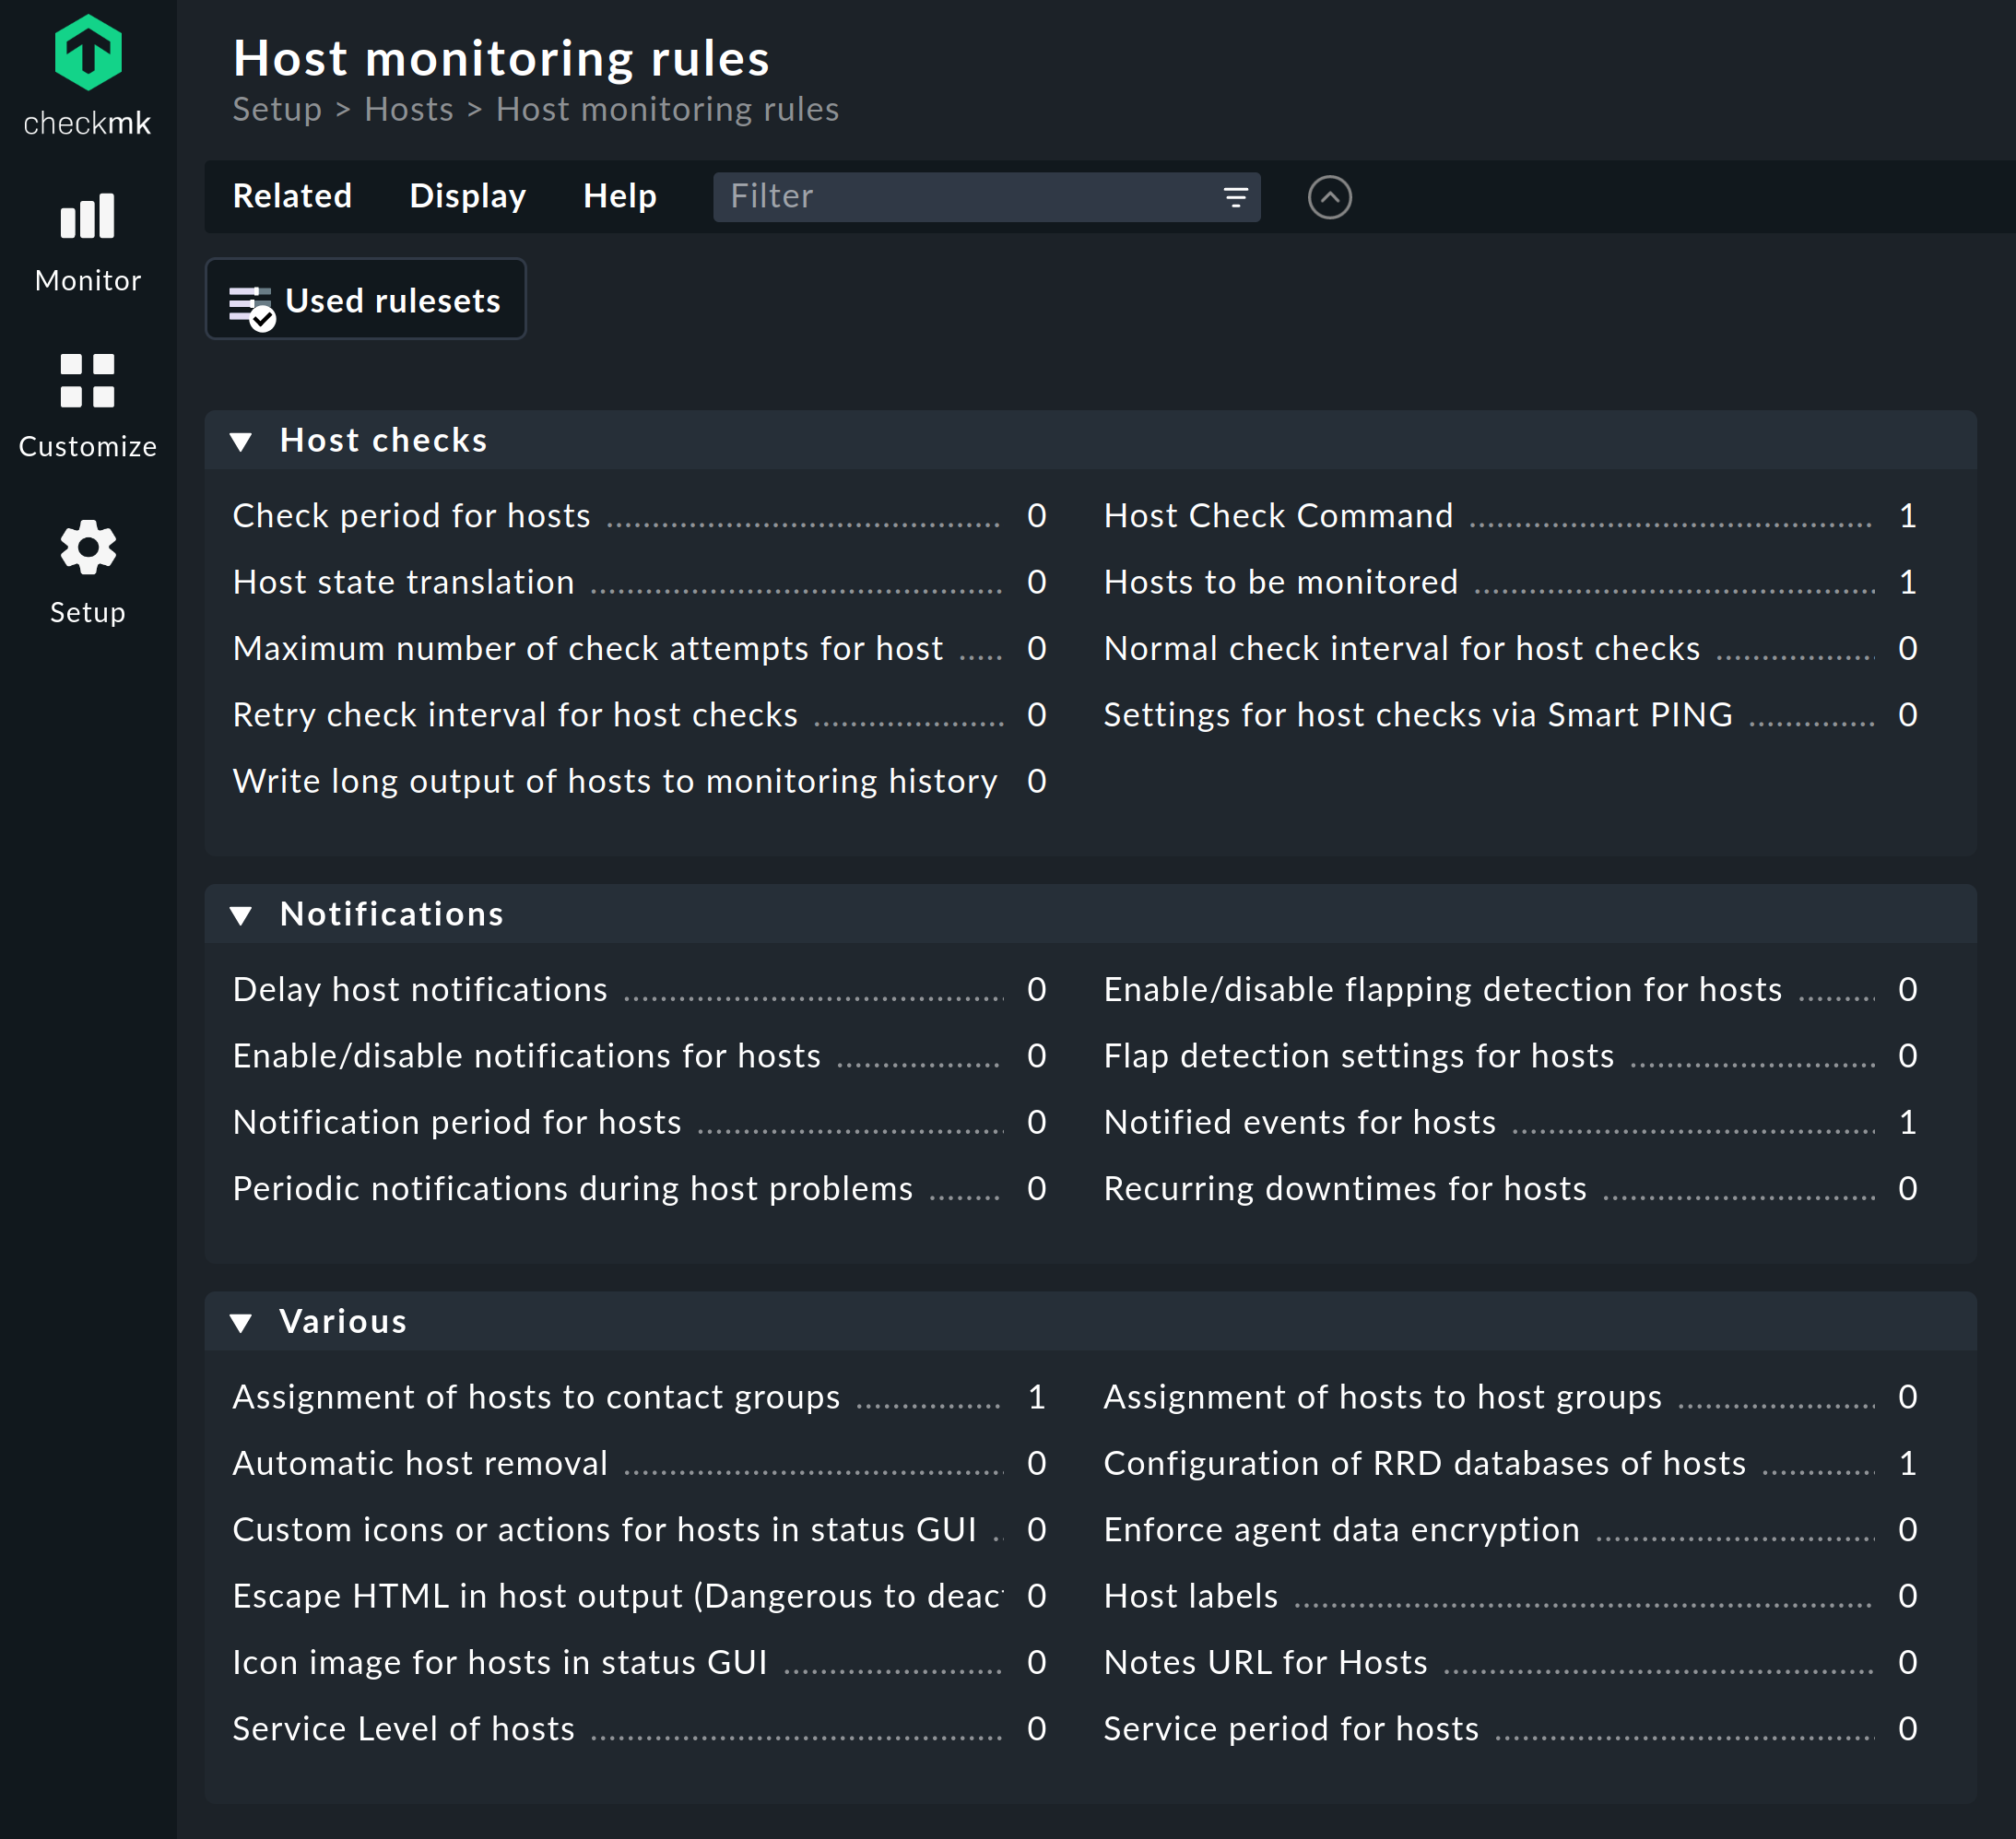 View of the Host monitoring rules in the setup menu.